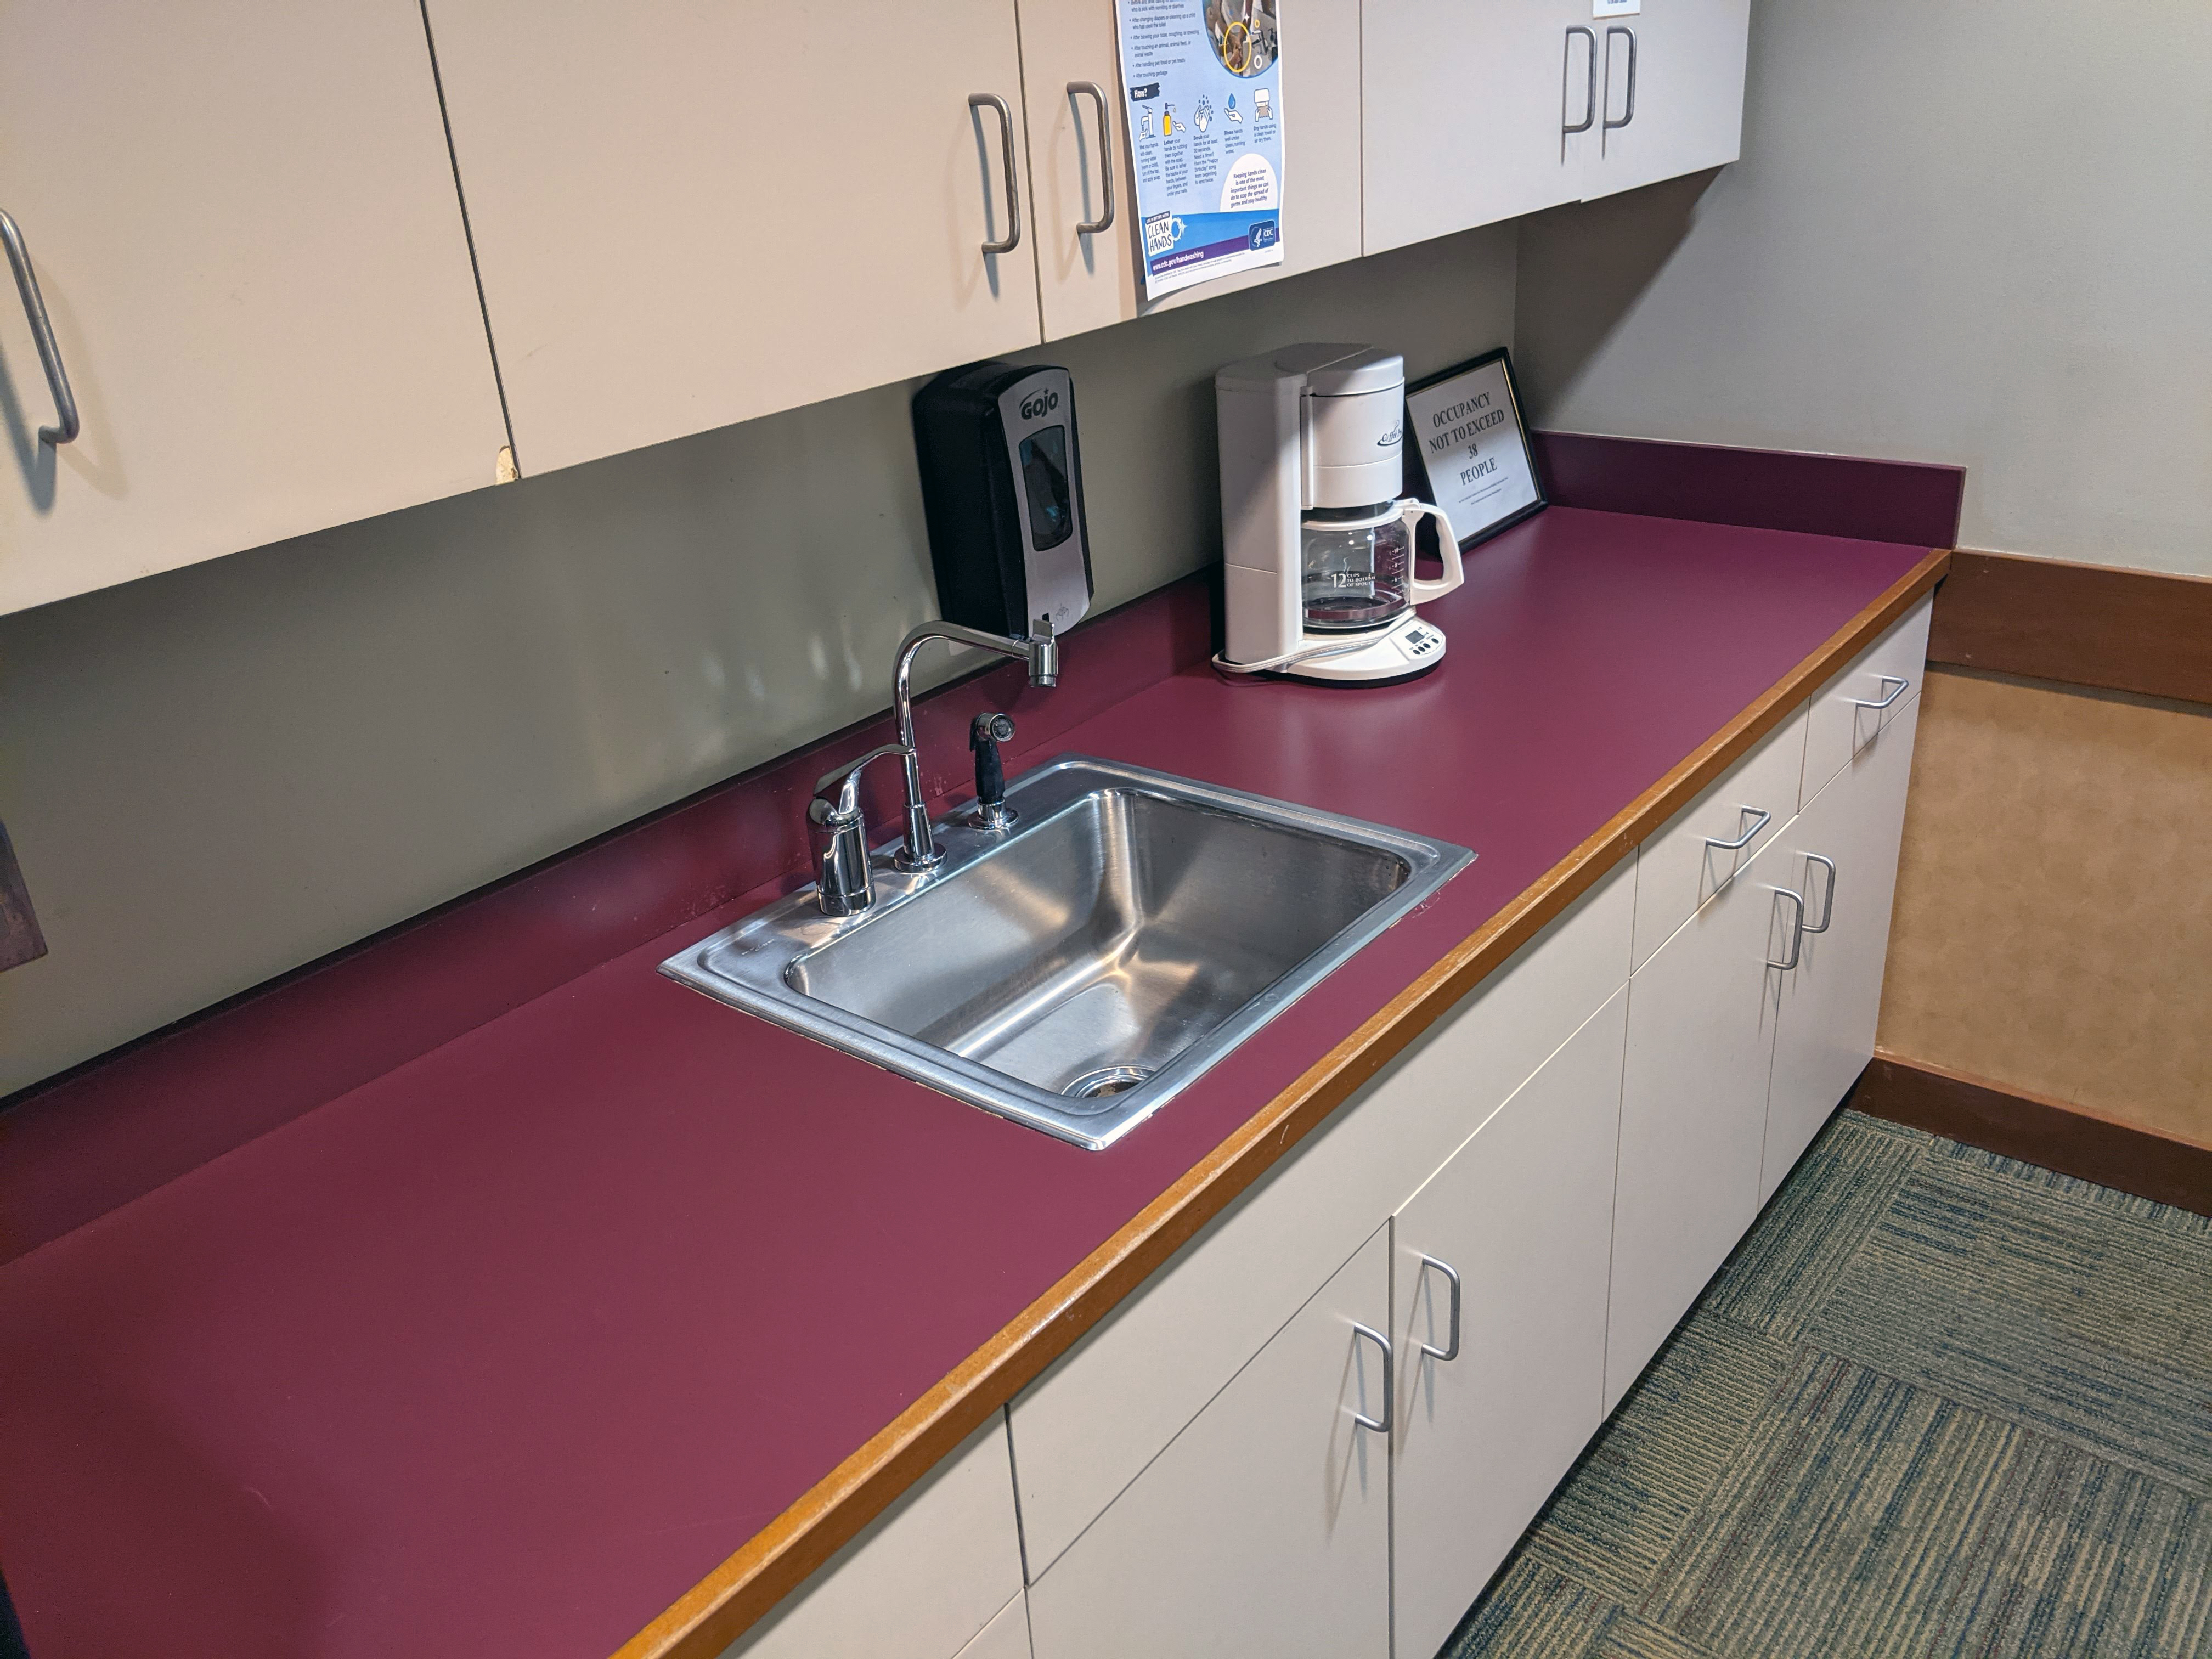 A kitchenette is available with cupboard space.